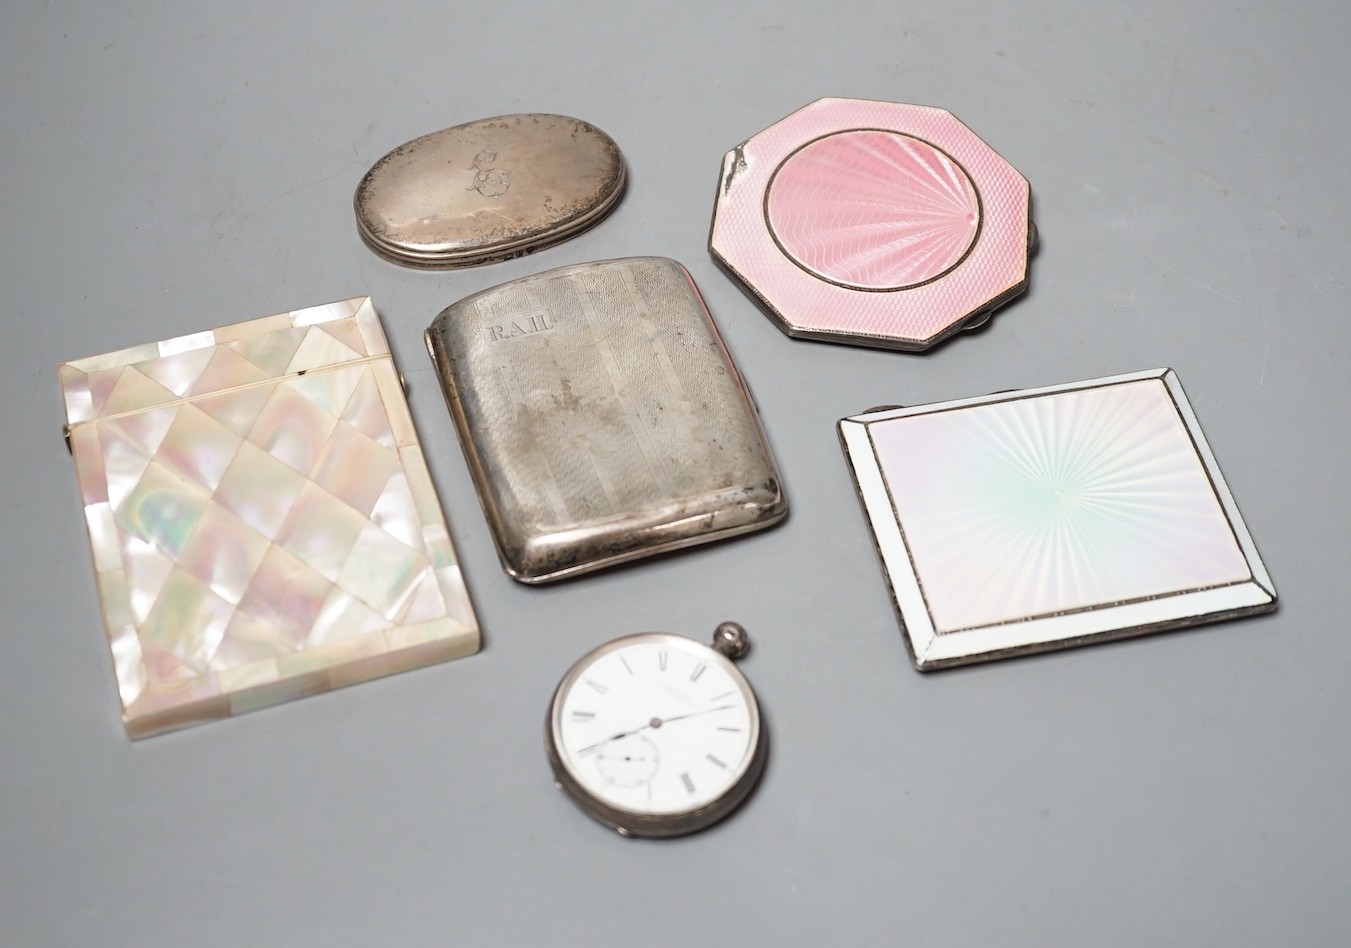 A 1920's silver and enamelled cigarette case, a 1930's silver and enamelled compact, a silver cigarette case, silver lid, silver pocket watch and a mother of pearl card case.